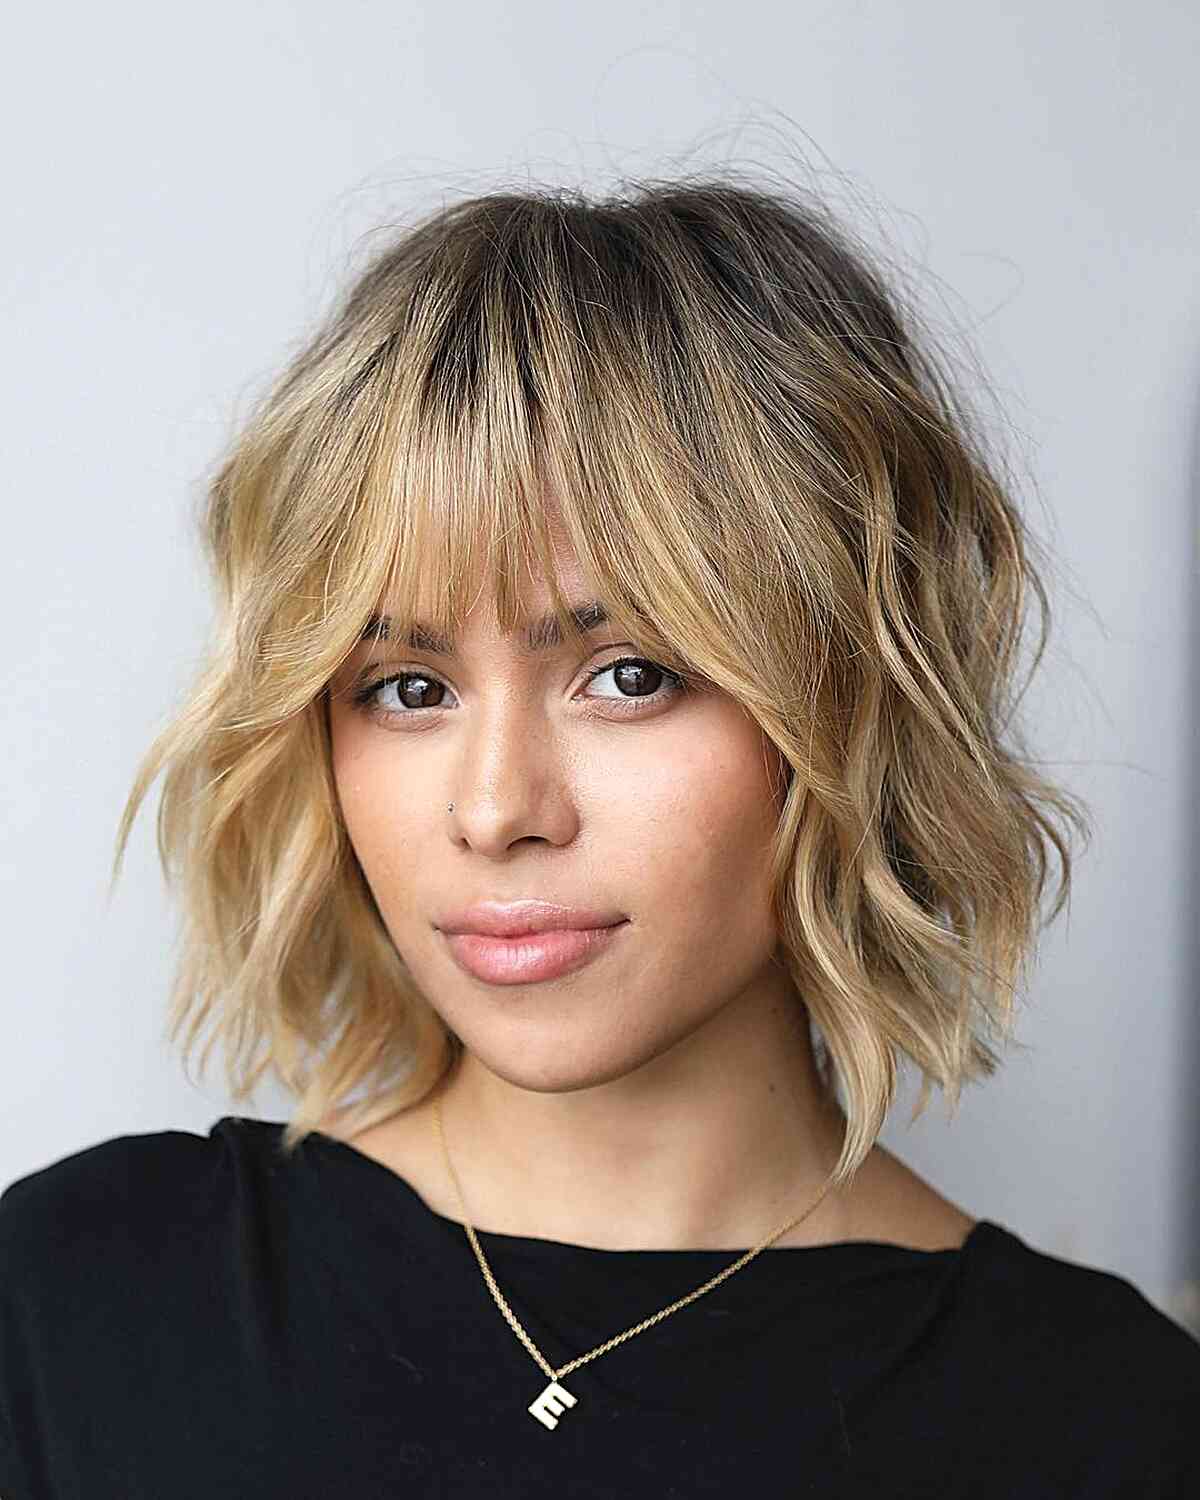 Dimensional Blonde Thin-Haired Bob Cut with Bangs